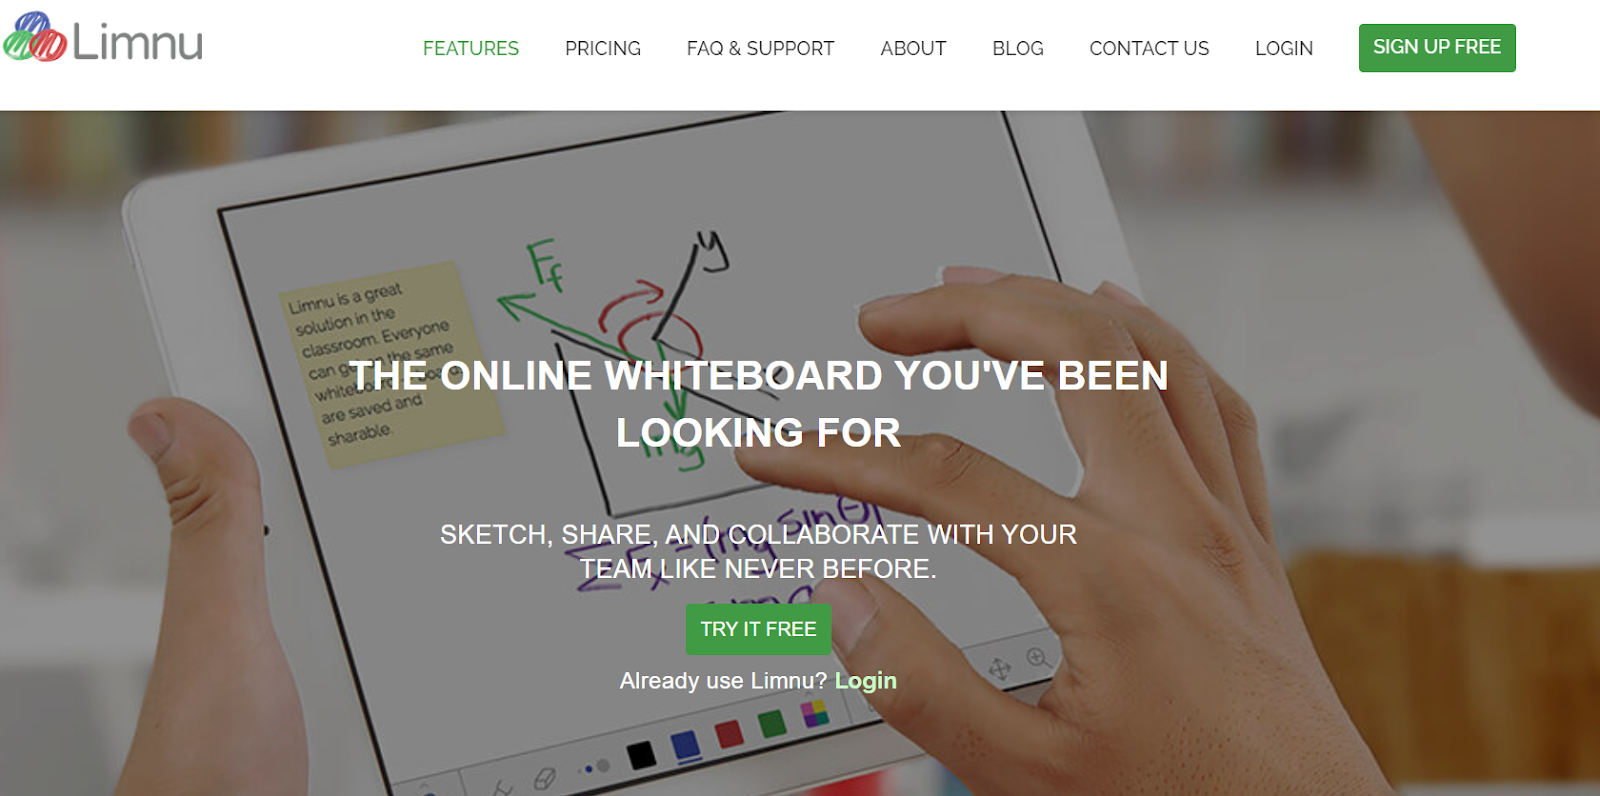 11 Best Online Whiteboard Tools For Any Purpose - Inkbot Design